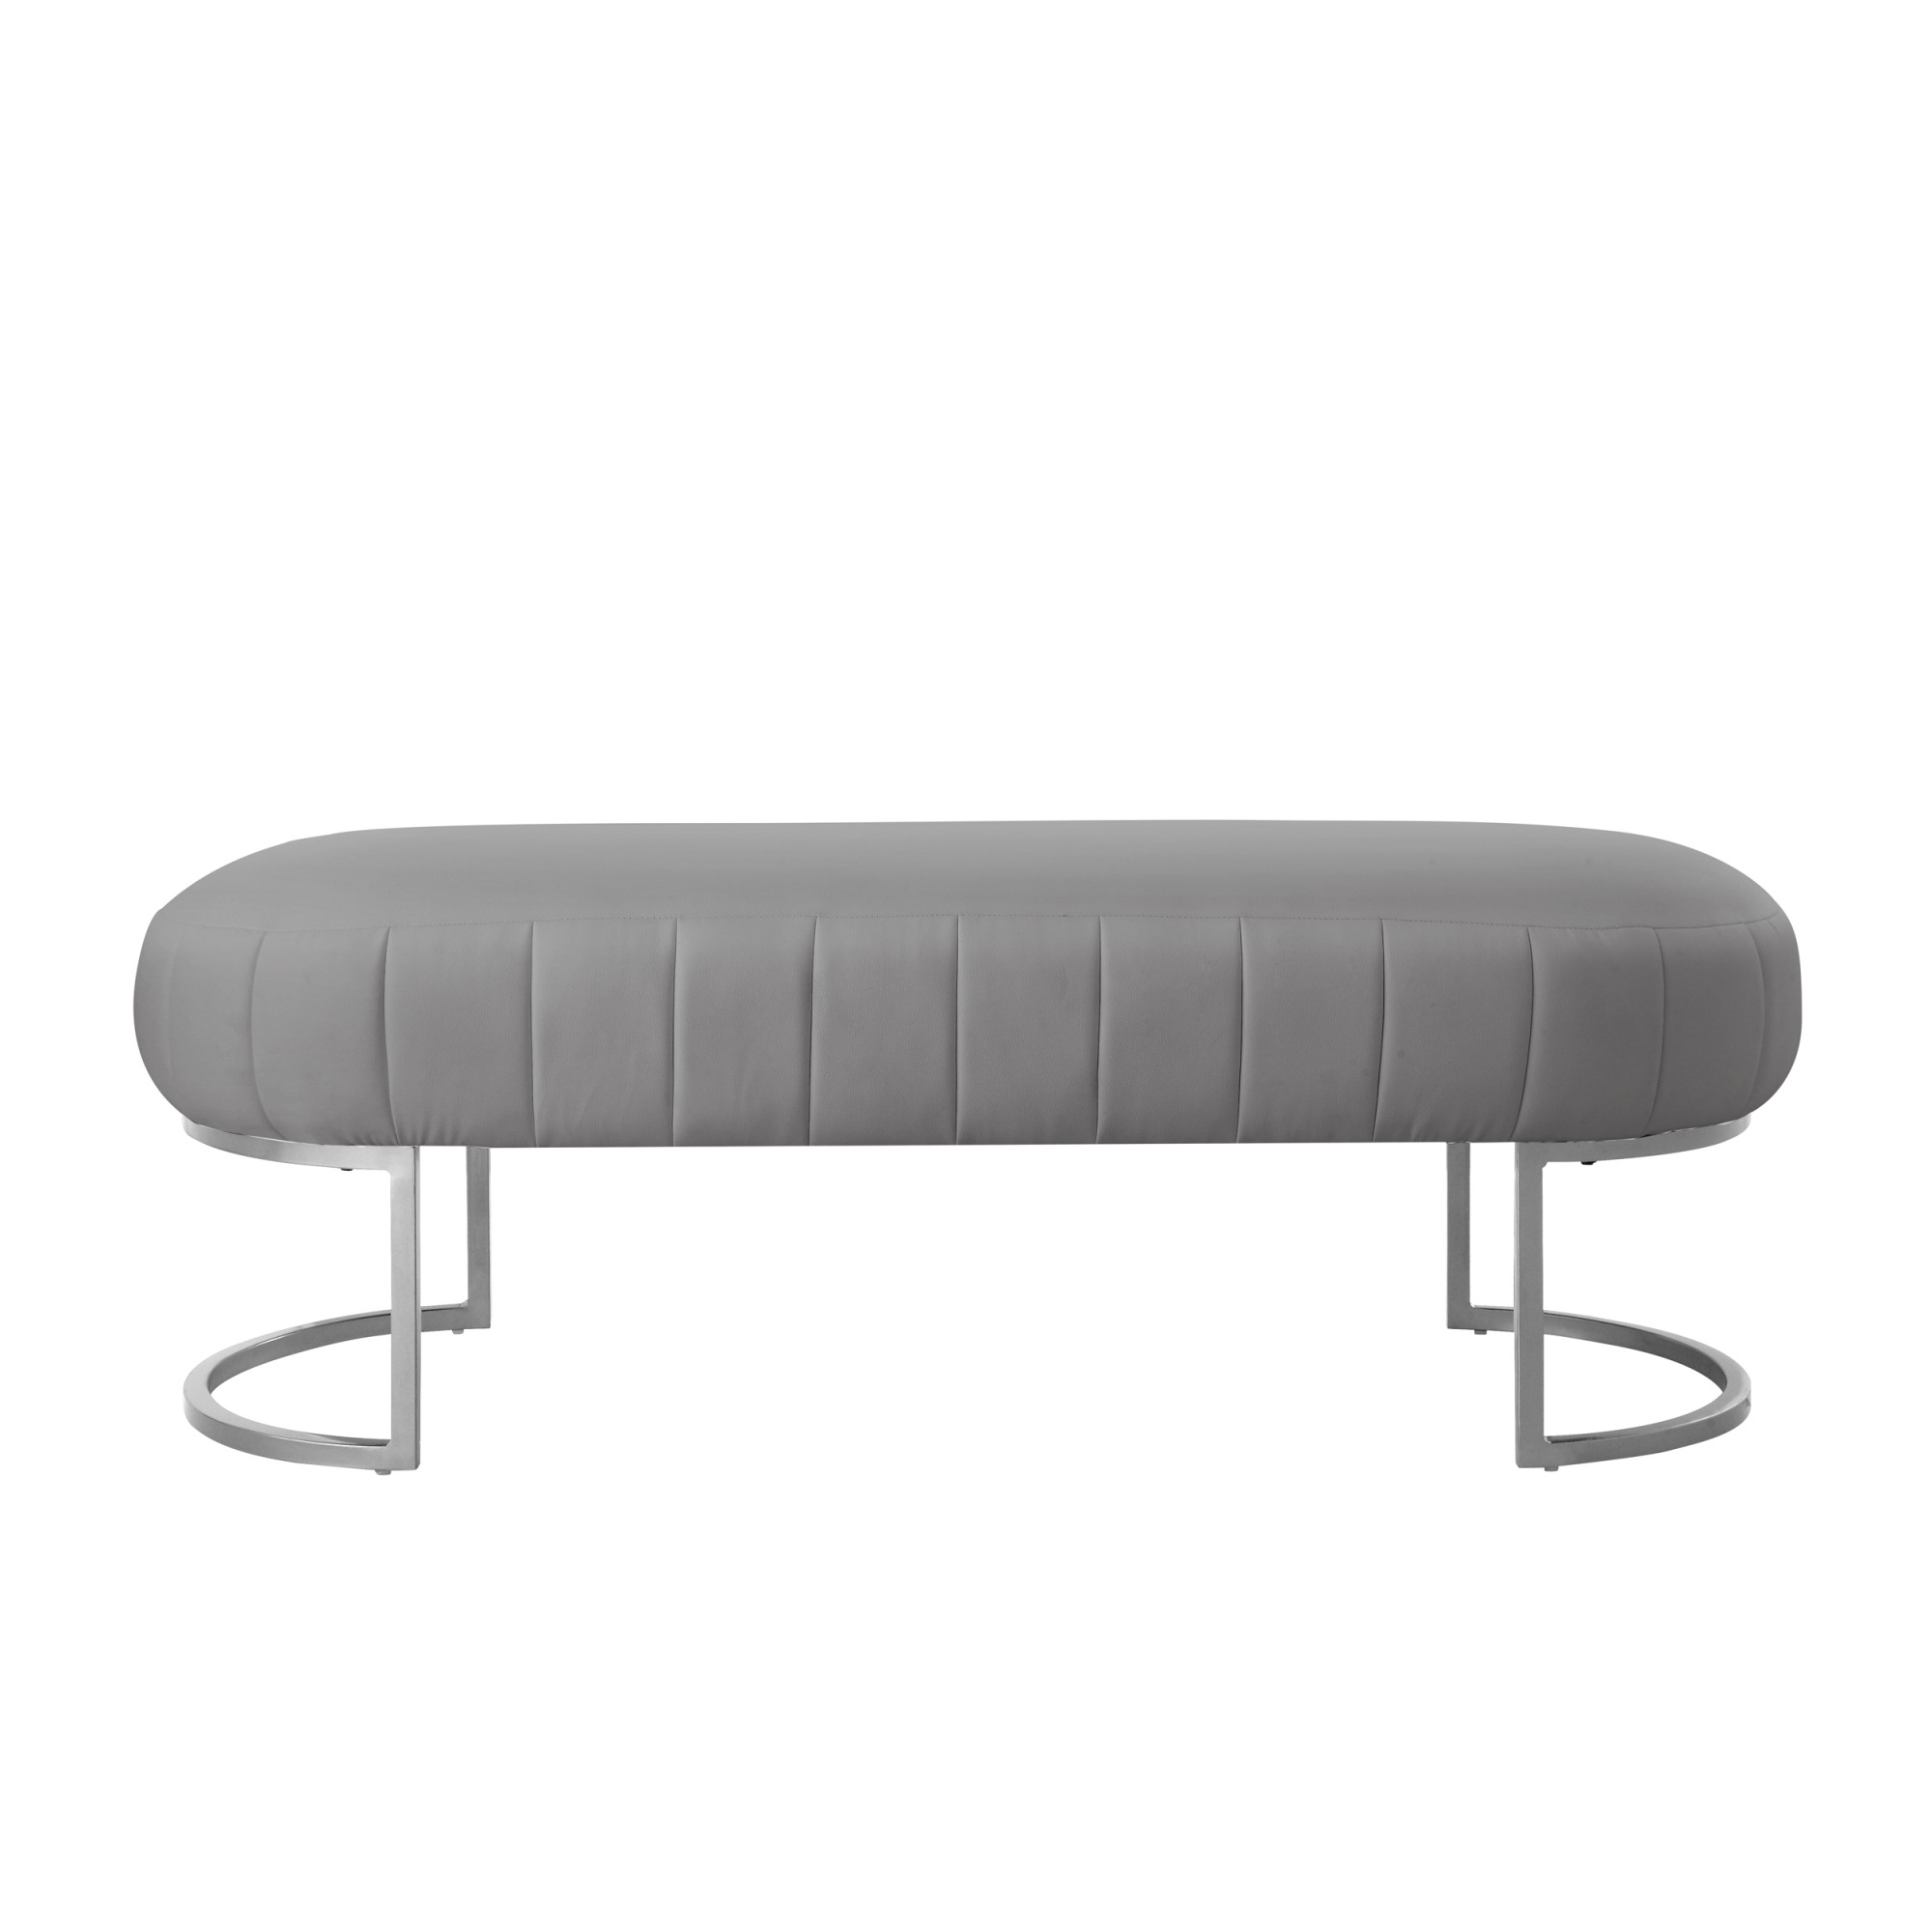 53" Gray and Silver Upholstered Faux Leather Bench-490974-1